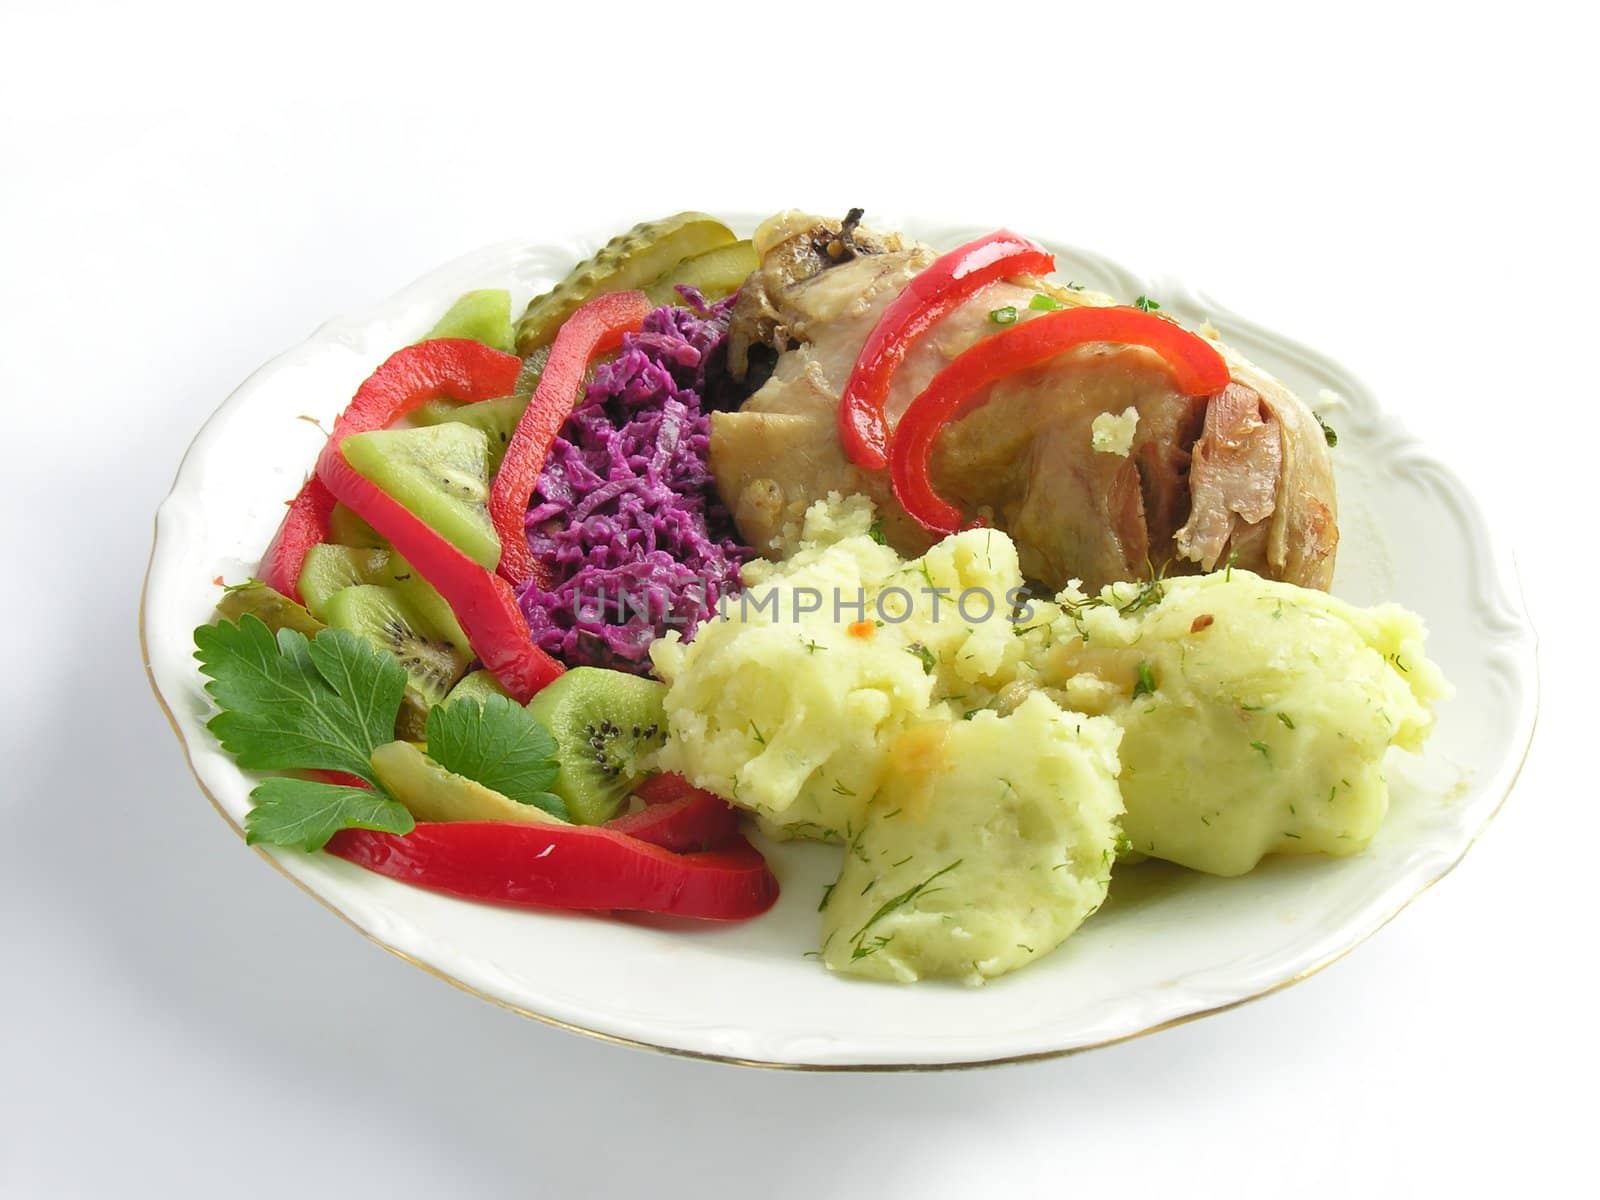 chicken leg baked with vegetable